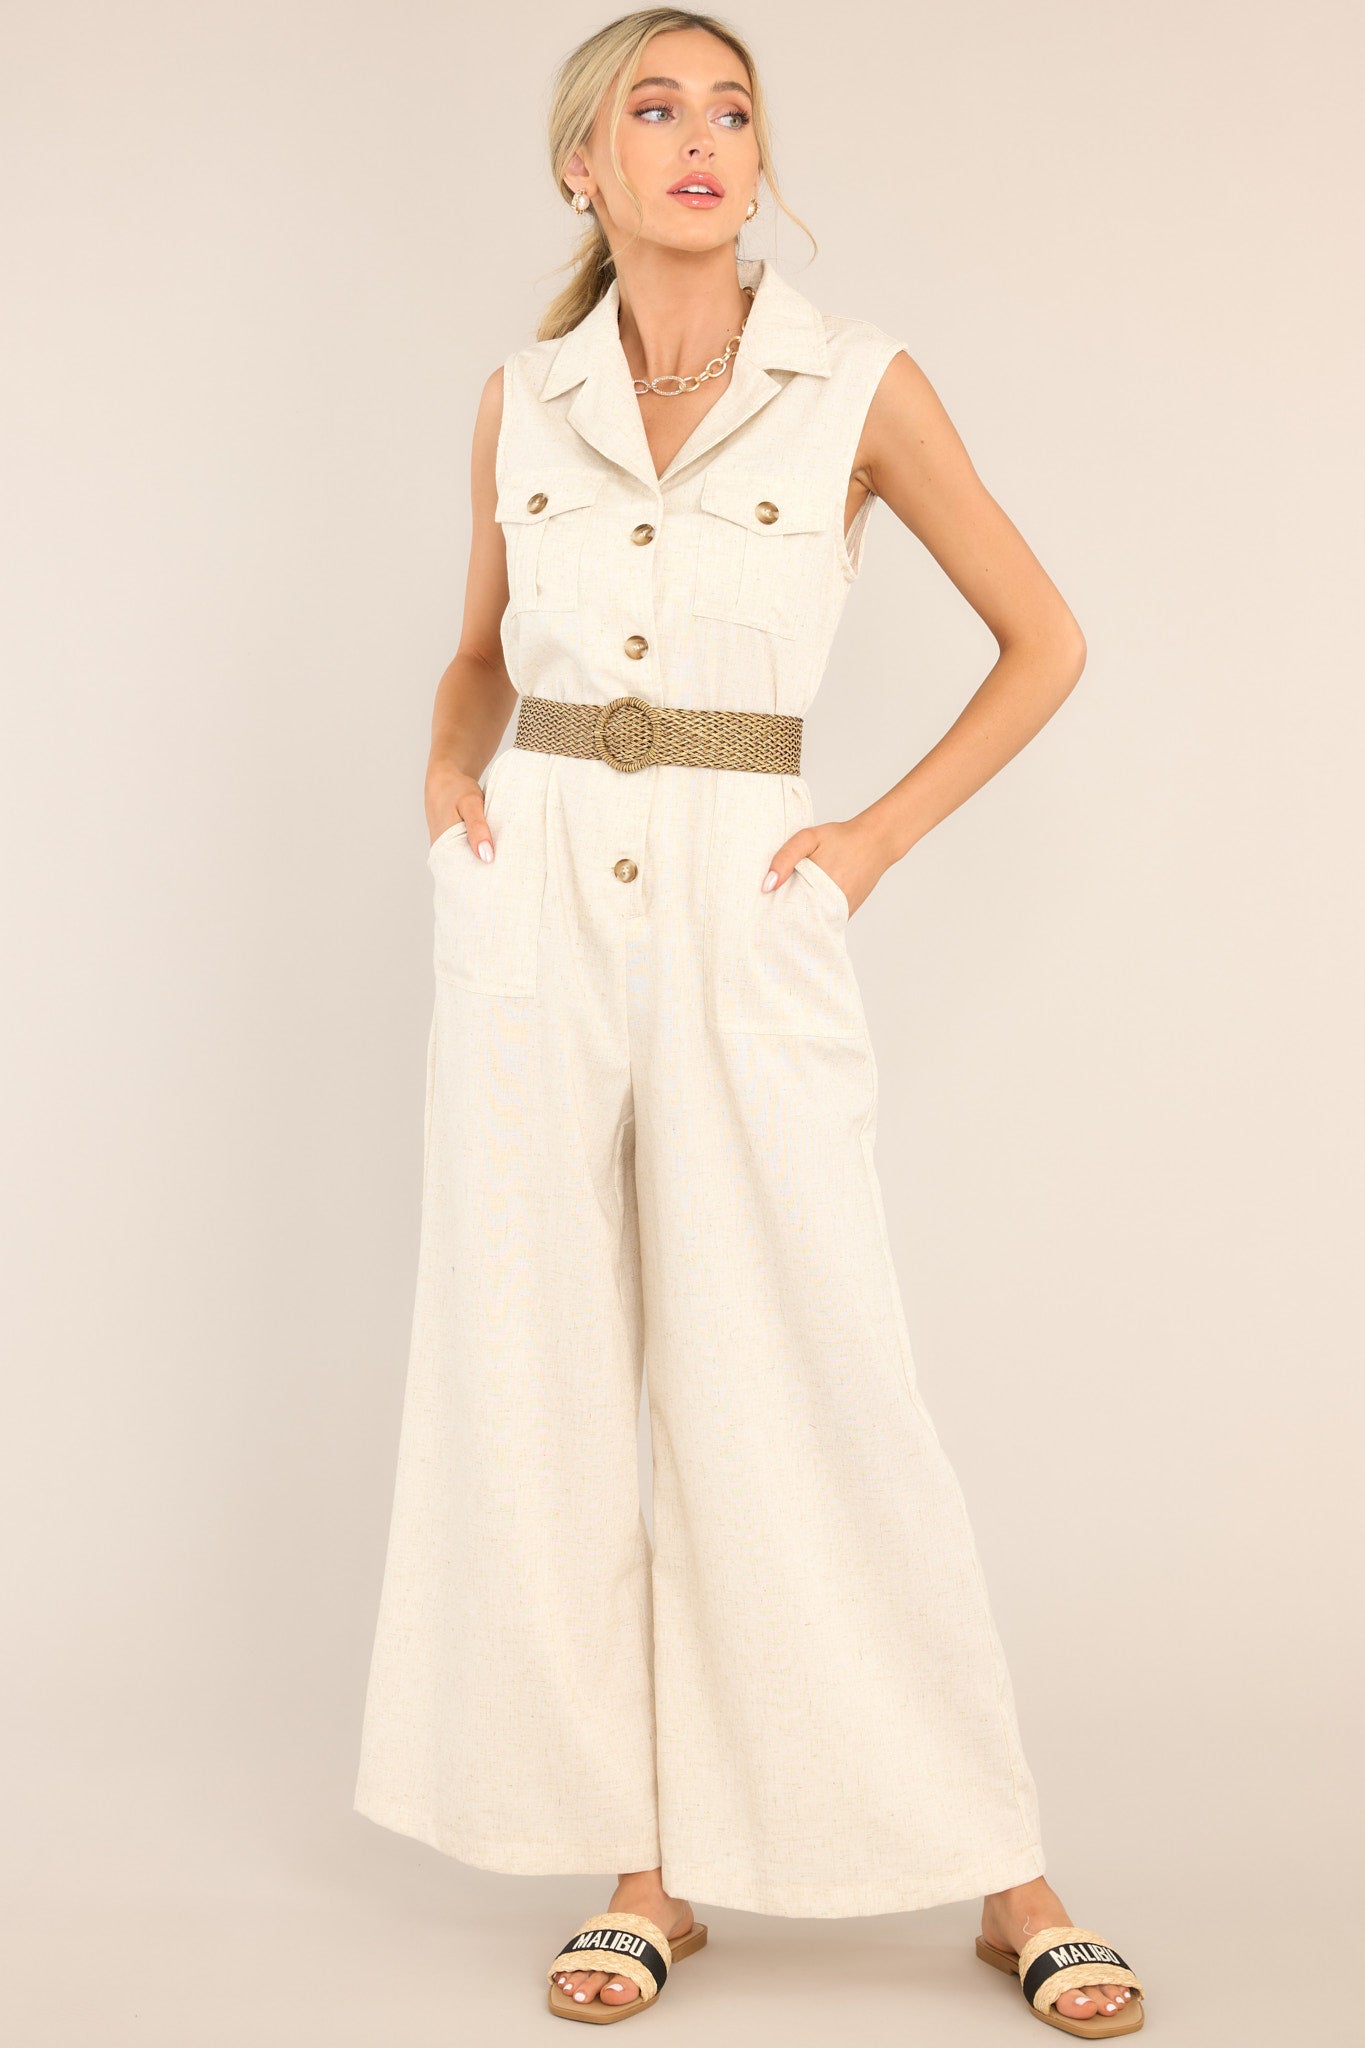 This oatmeal colored jumpsuit features a notched lapel collared neckline, chest pockets, a functional button front, belt loops, an adjustable belt, an elastic insert at the back of the waist, hip pockets, and a wide leg.